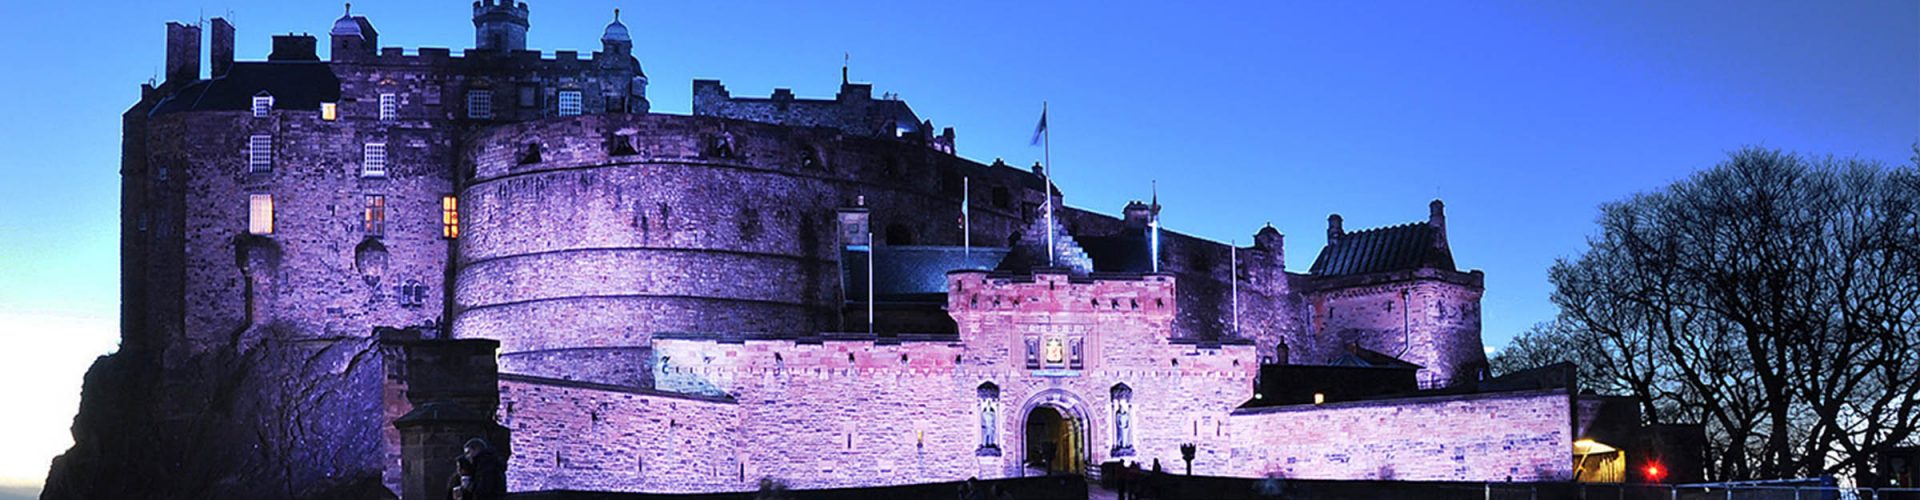 The entrance to Edinburgh Castle at night dramatically lit up